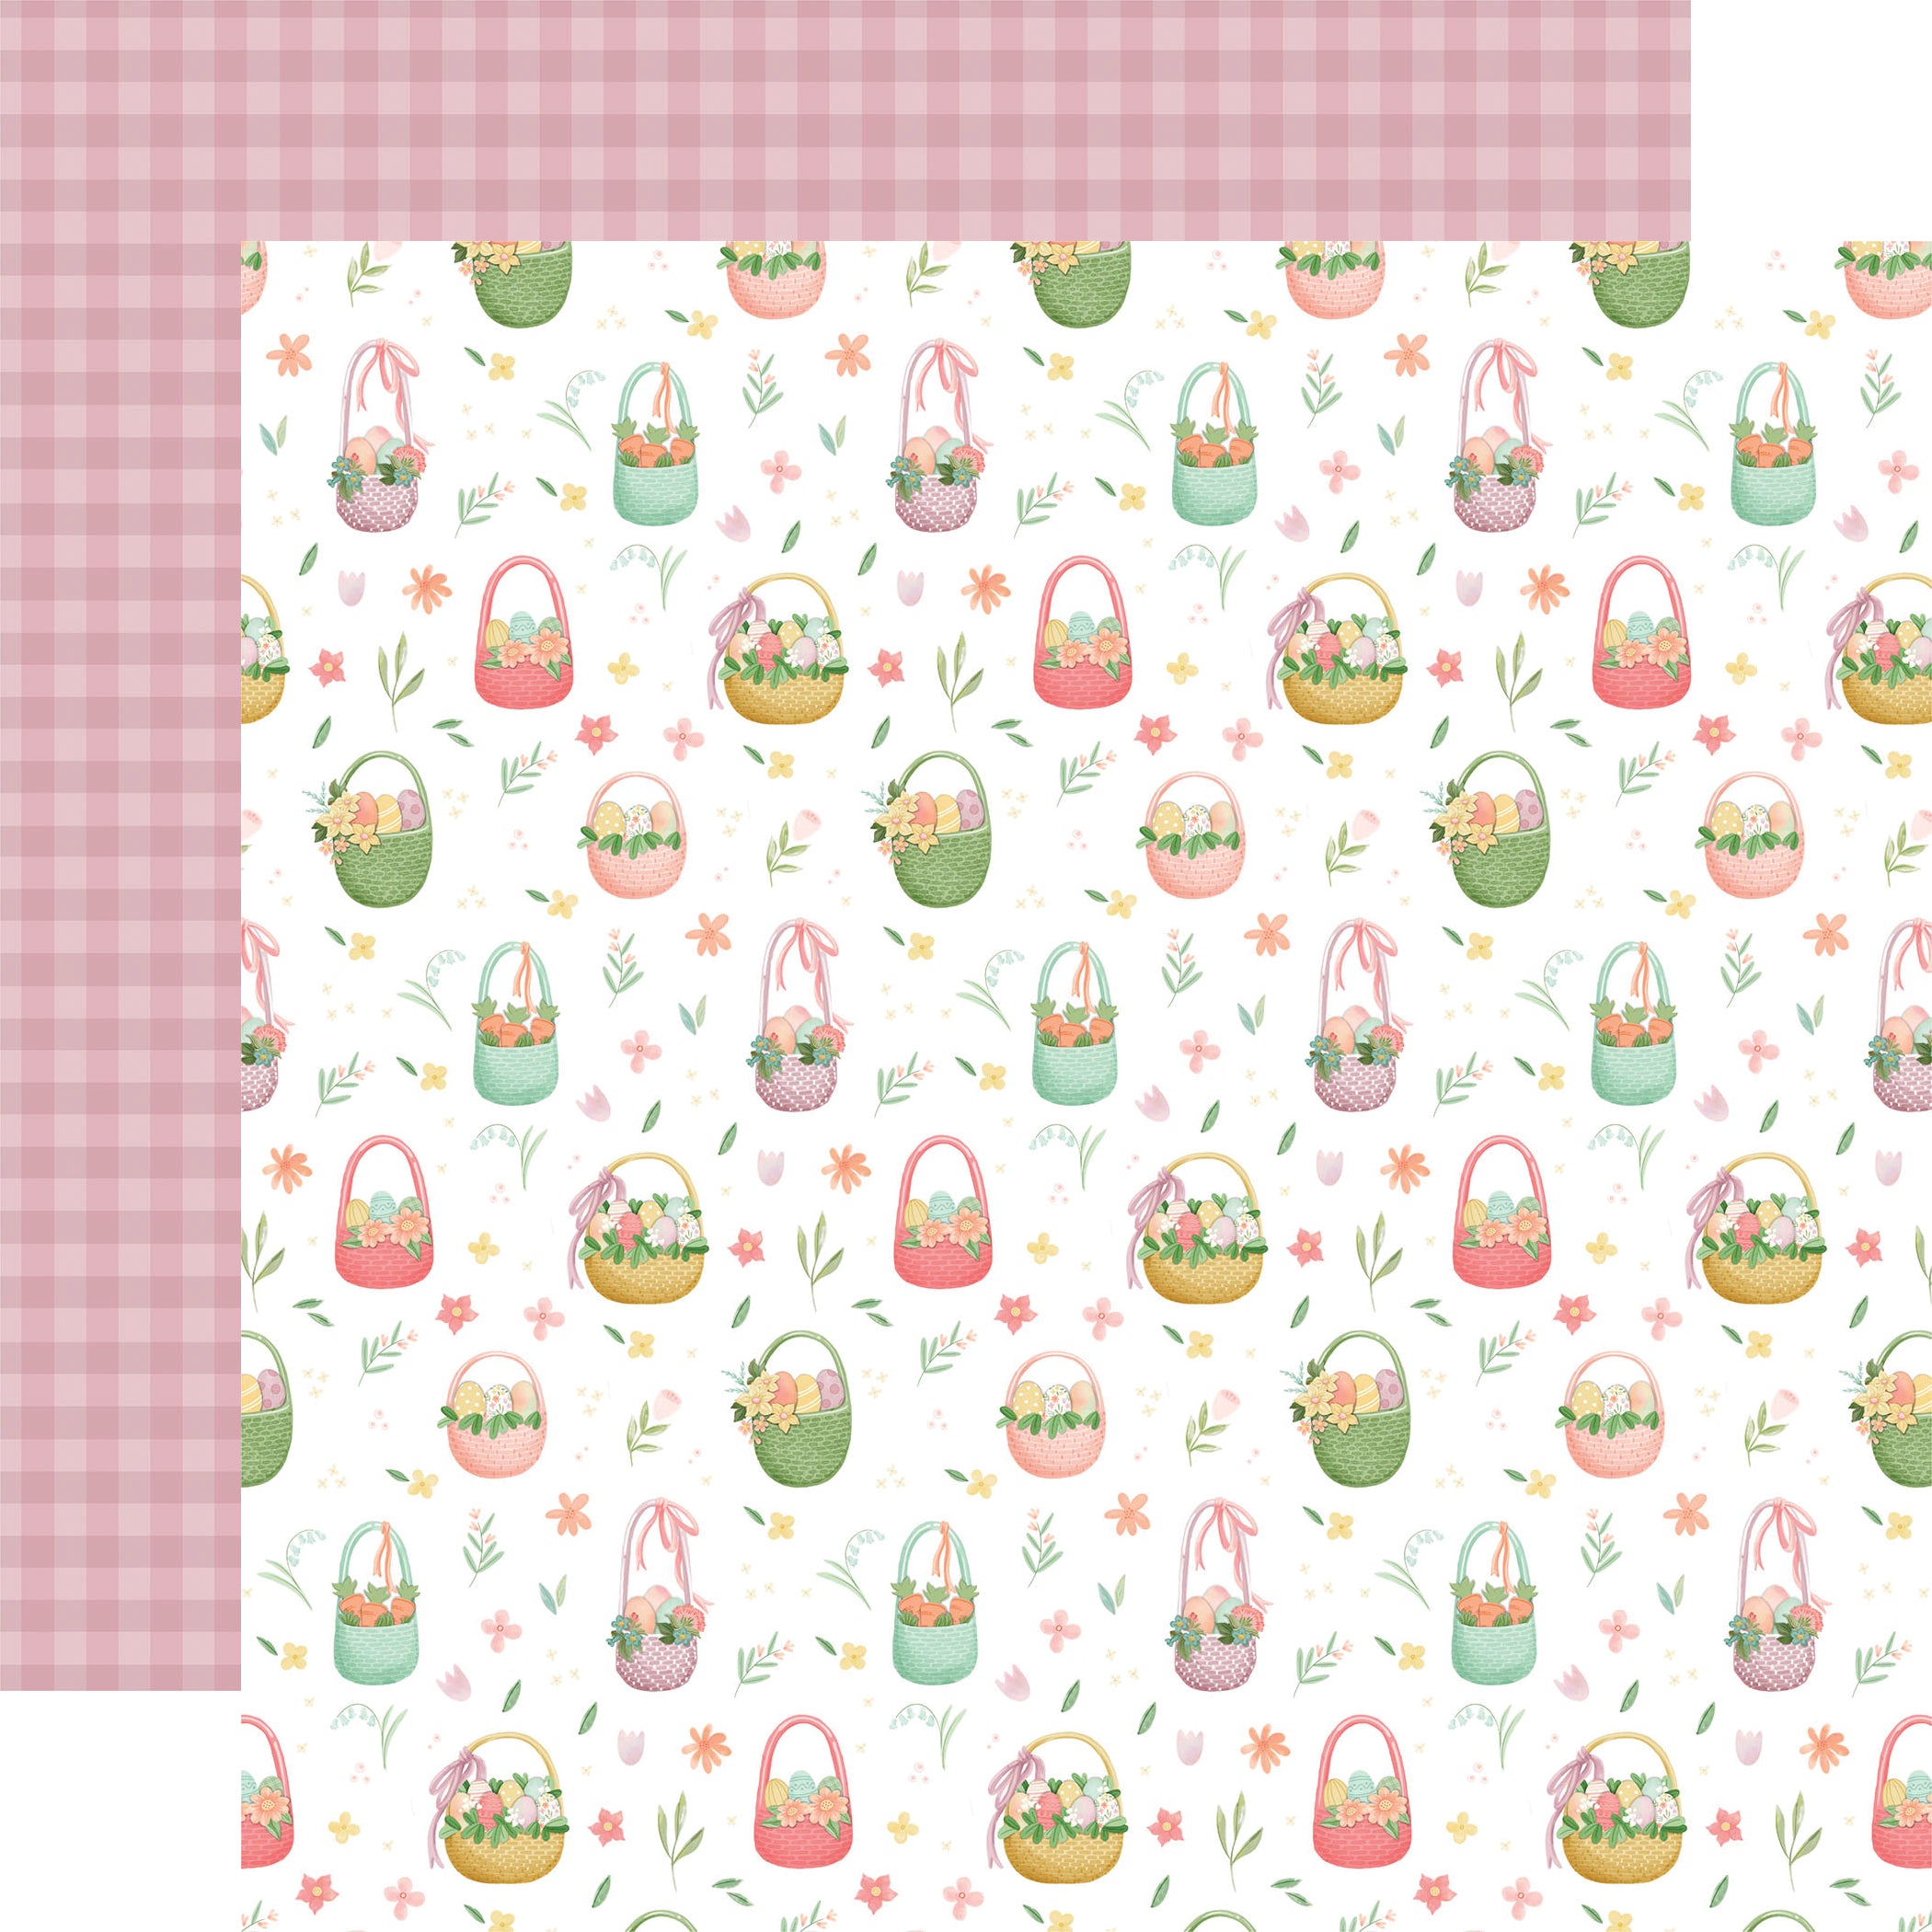 Here Comes Easter Collection Egg Hunt Finds 12 x 12 Double-Sided Scrapbook Paper by Carta Bella